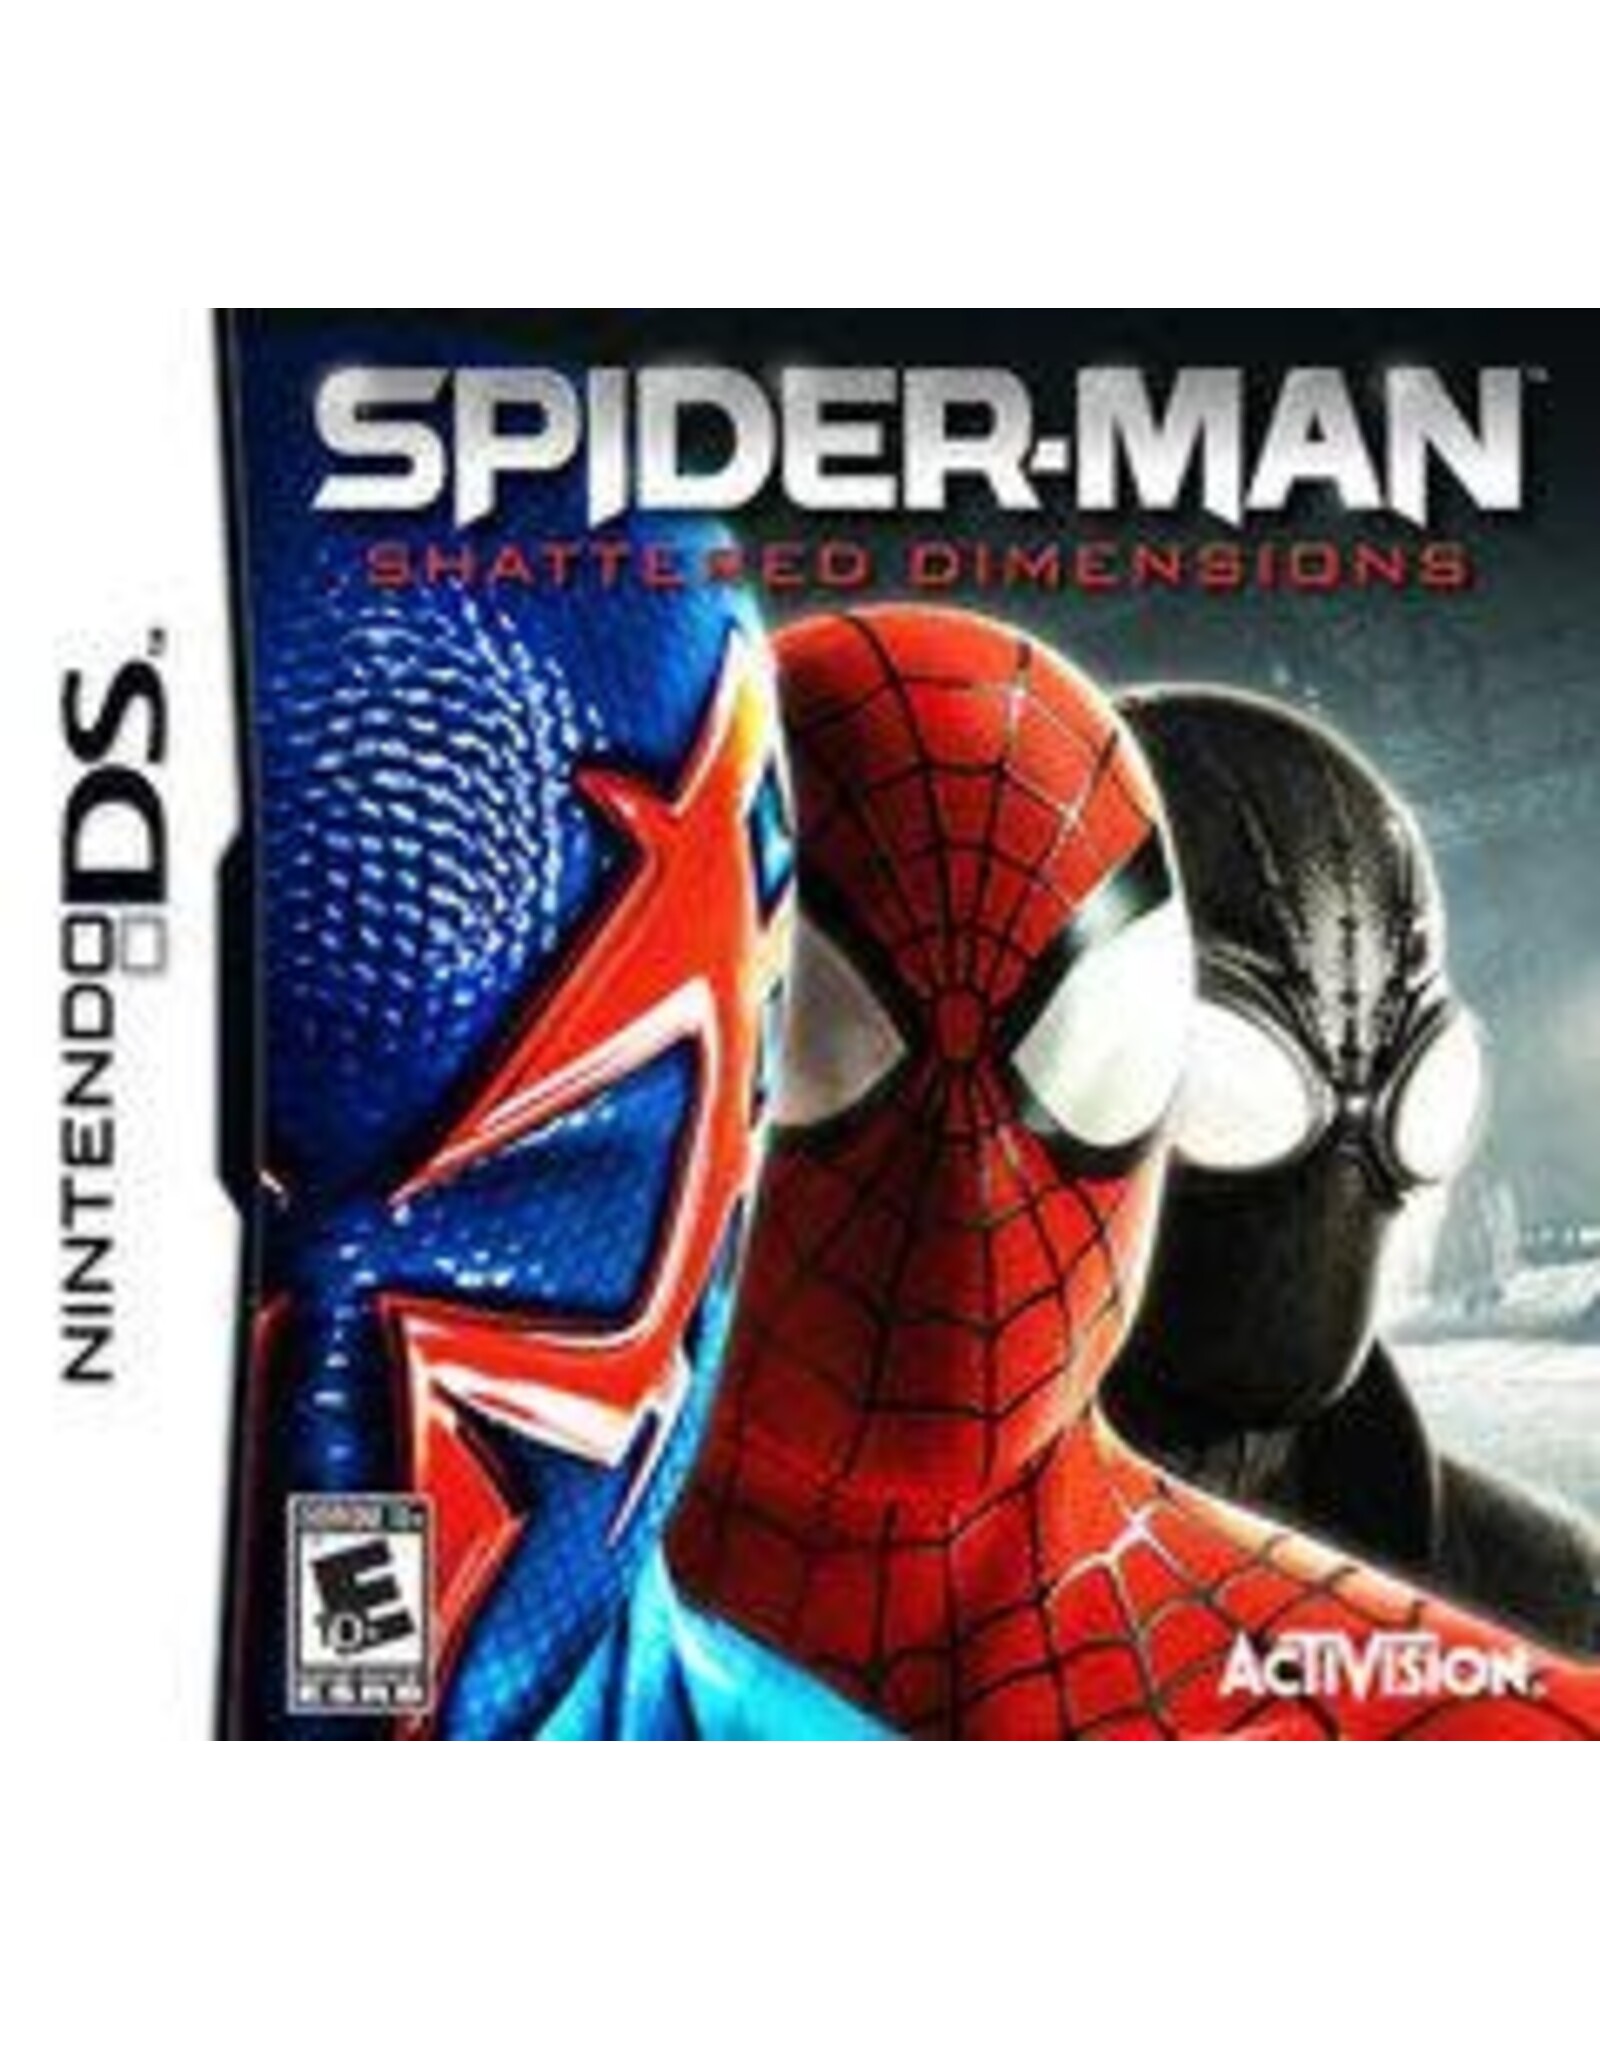 Nintendo DS Spider-man: Shattered Dimensions (Cart Only)